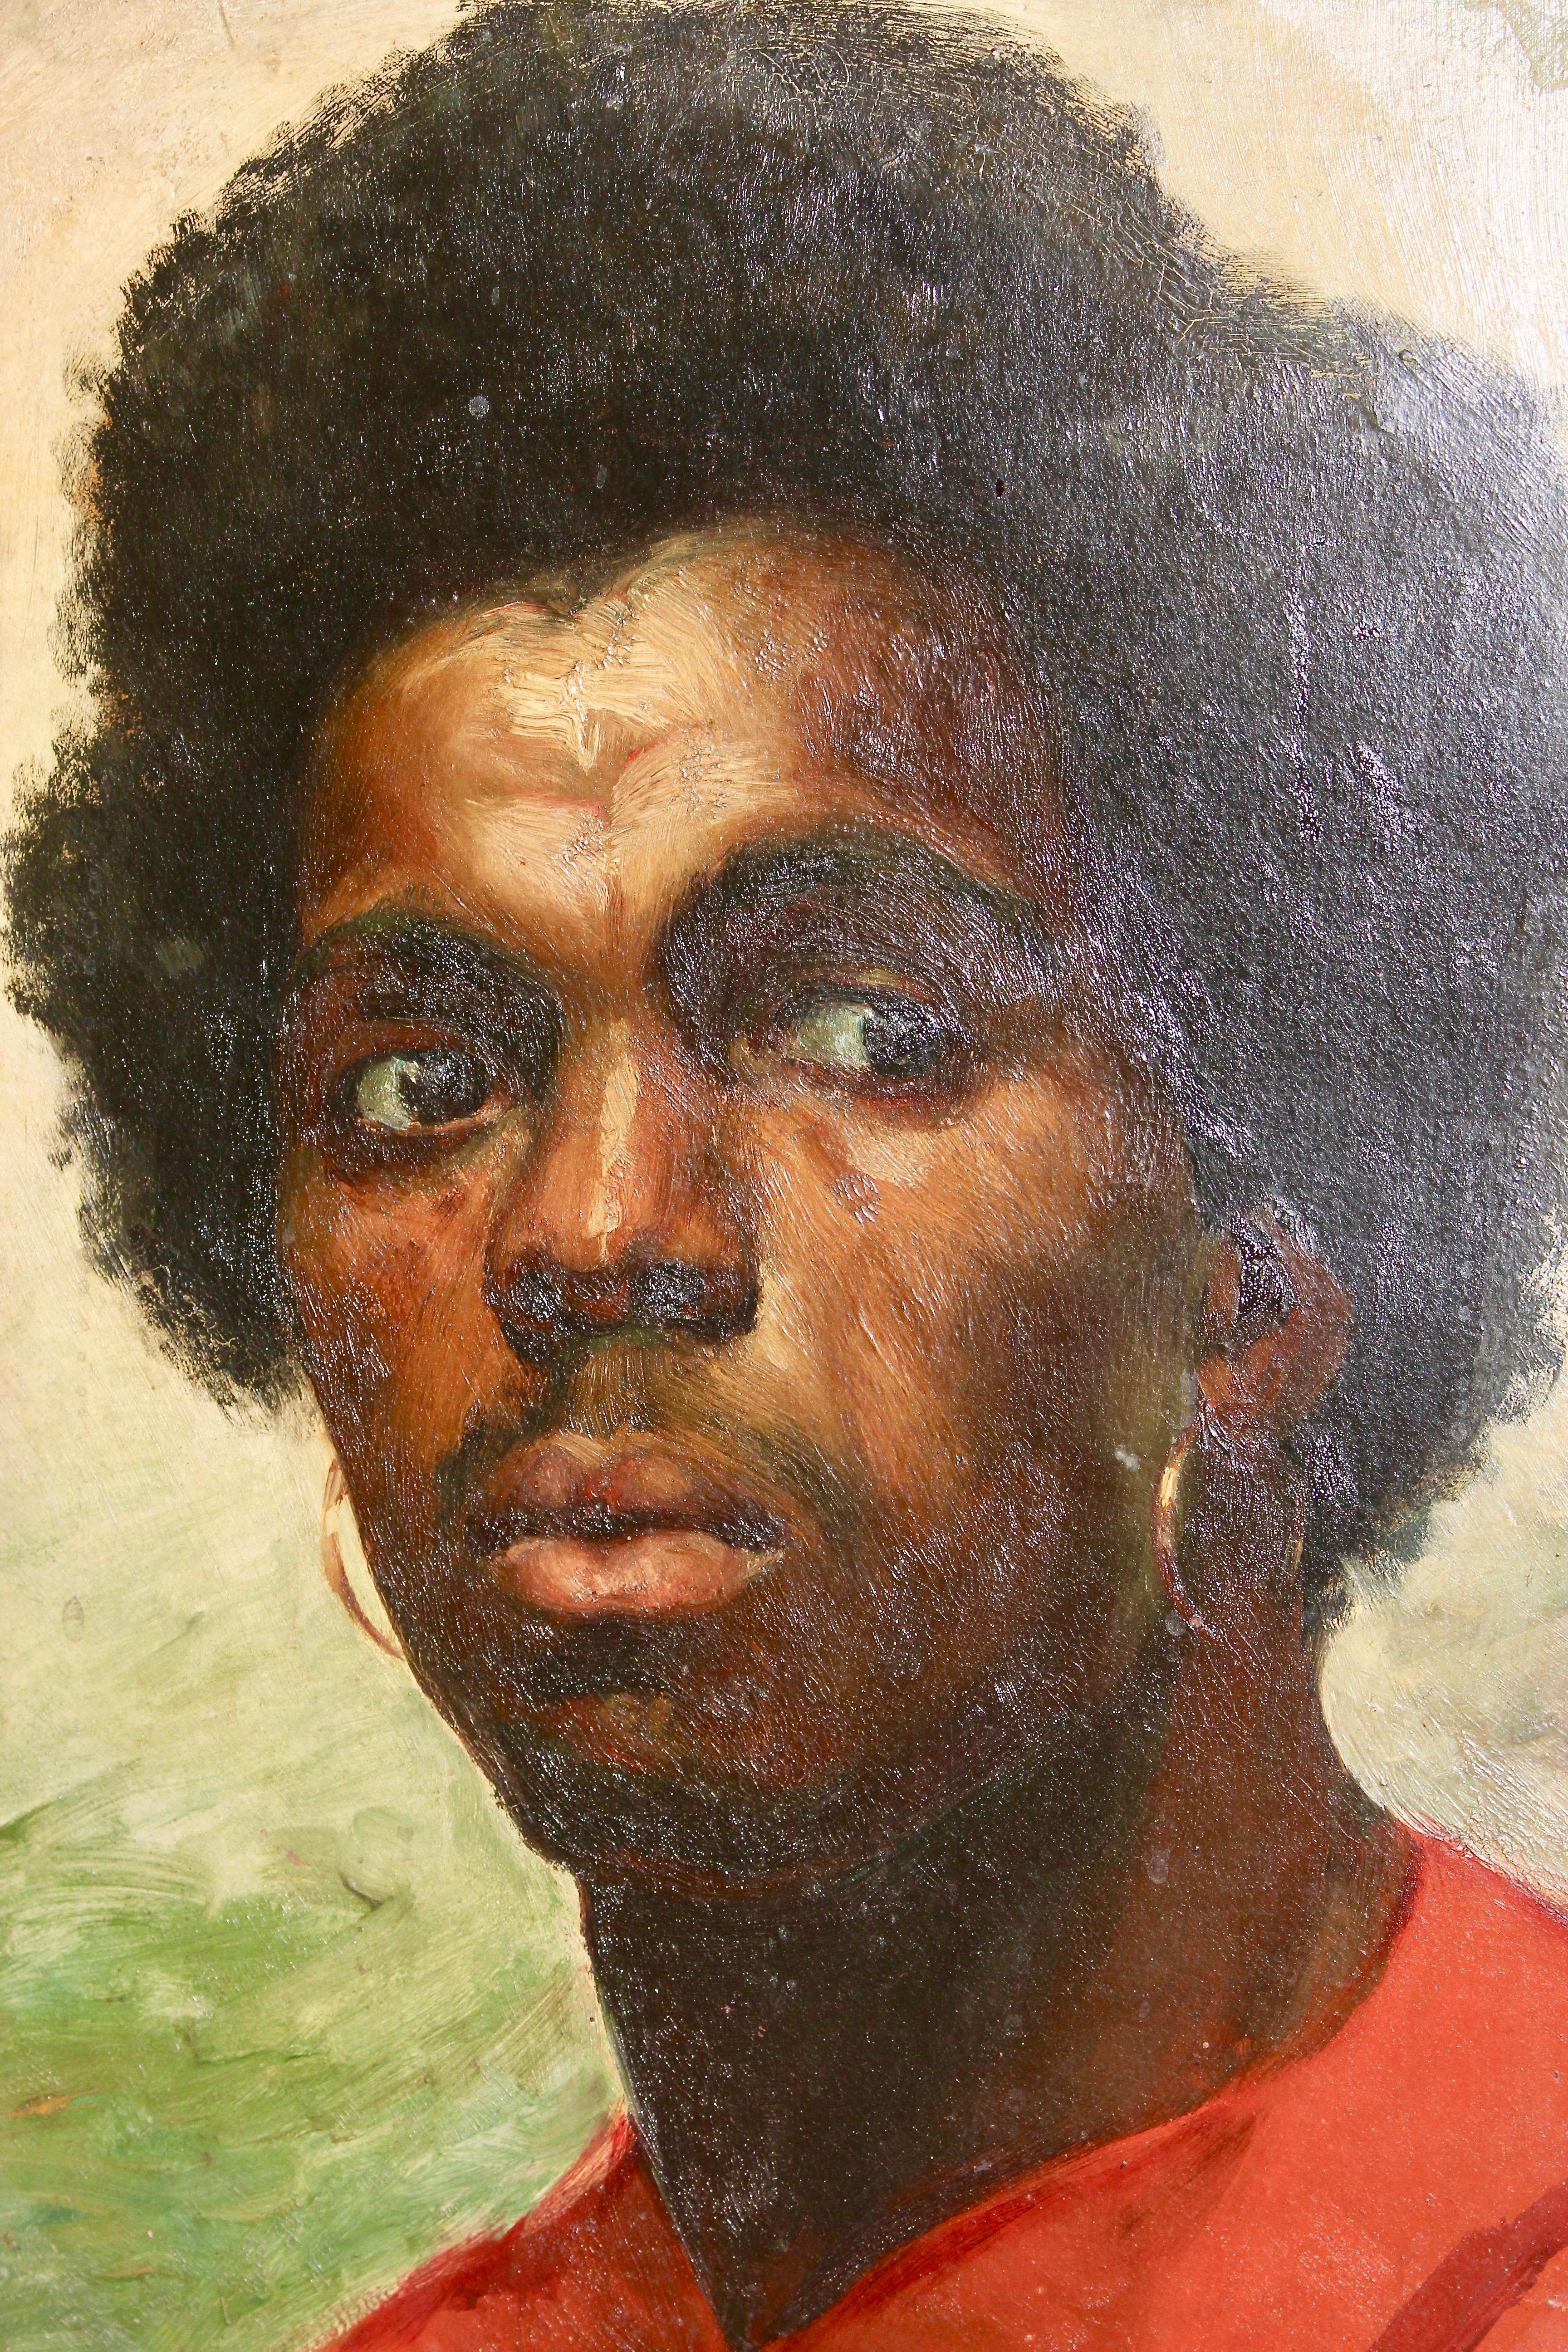 Painting, 19th Century, Portrait of an African Boy, signed, oil on canvas. - Brown Figurative Painting by Unknown